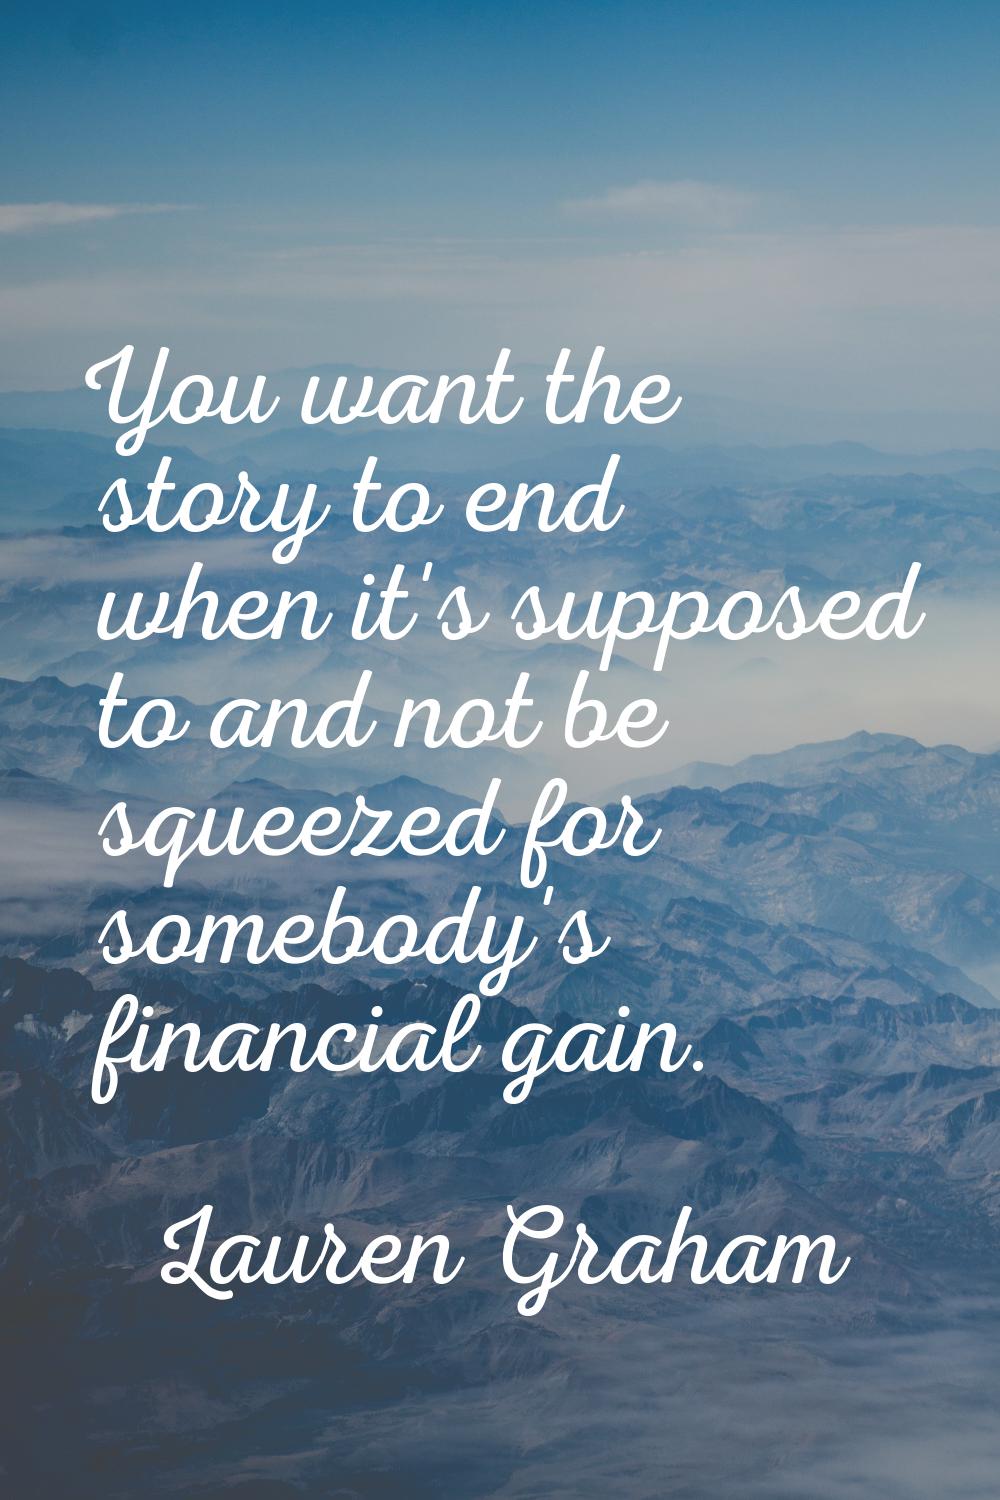 You want the story to end when it's supposed to and not be squeezed for somebody's financial gain.